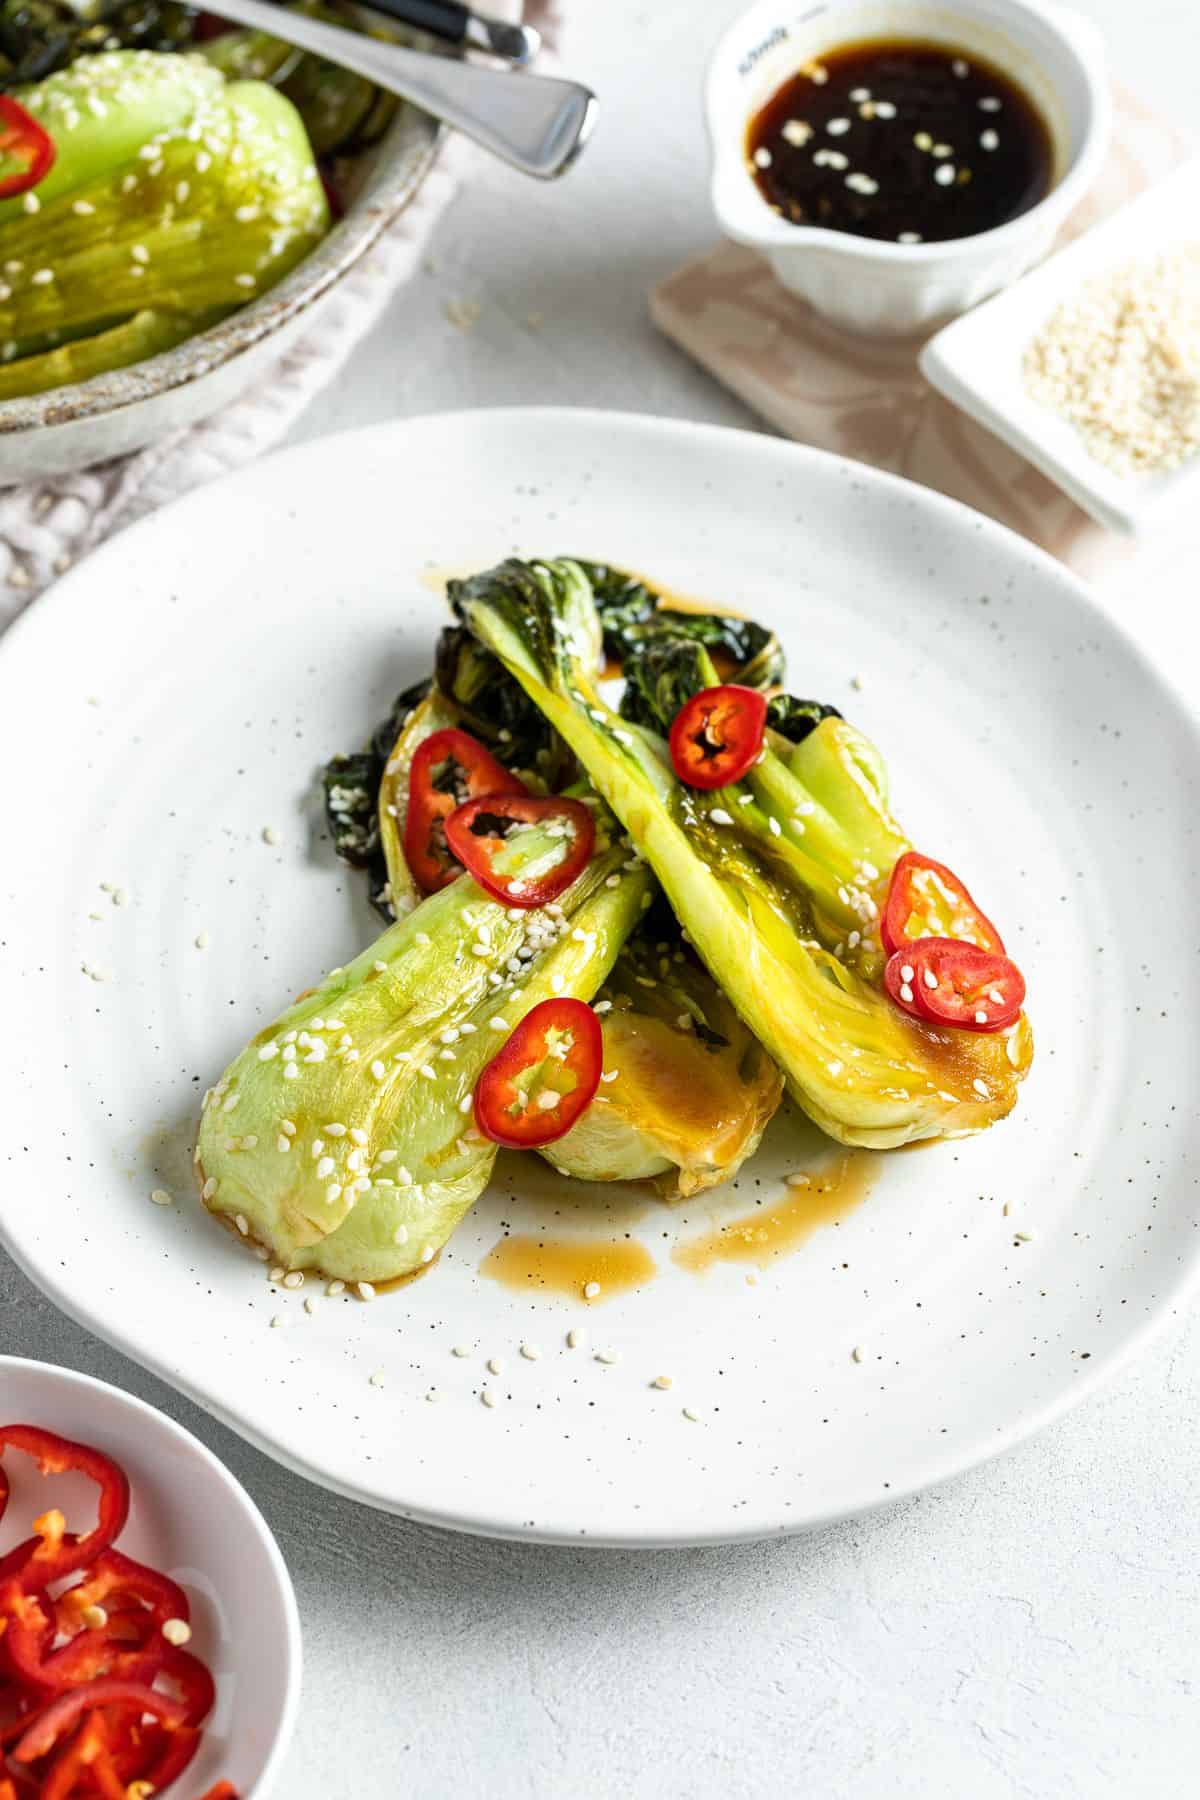 A serve of roasted bok choy on a round white plate, garnished with sesame seeds and chilli.